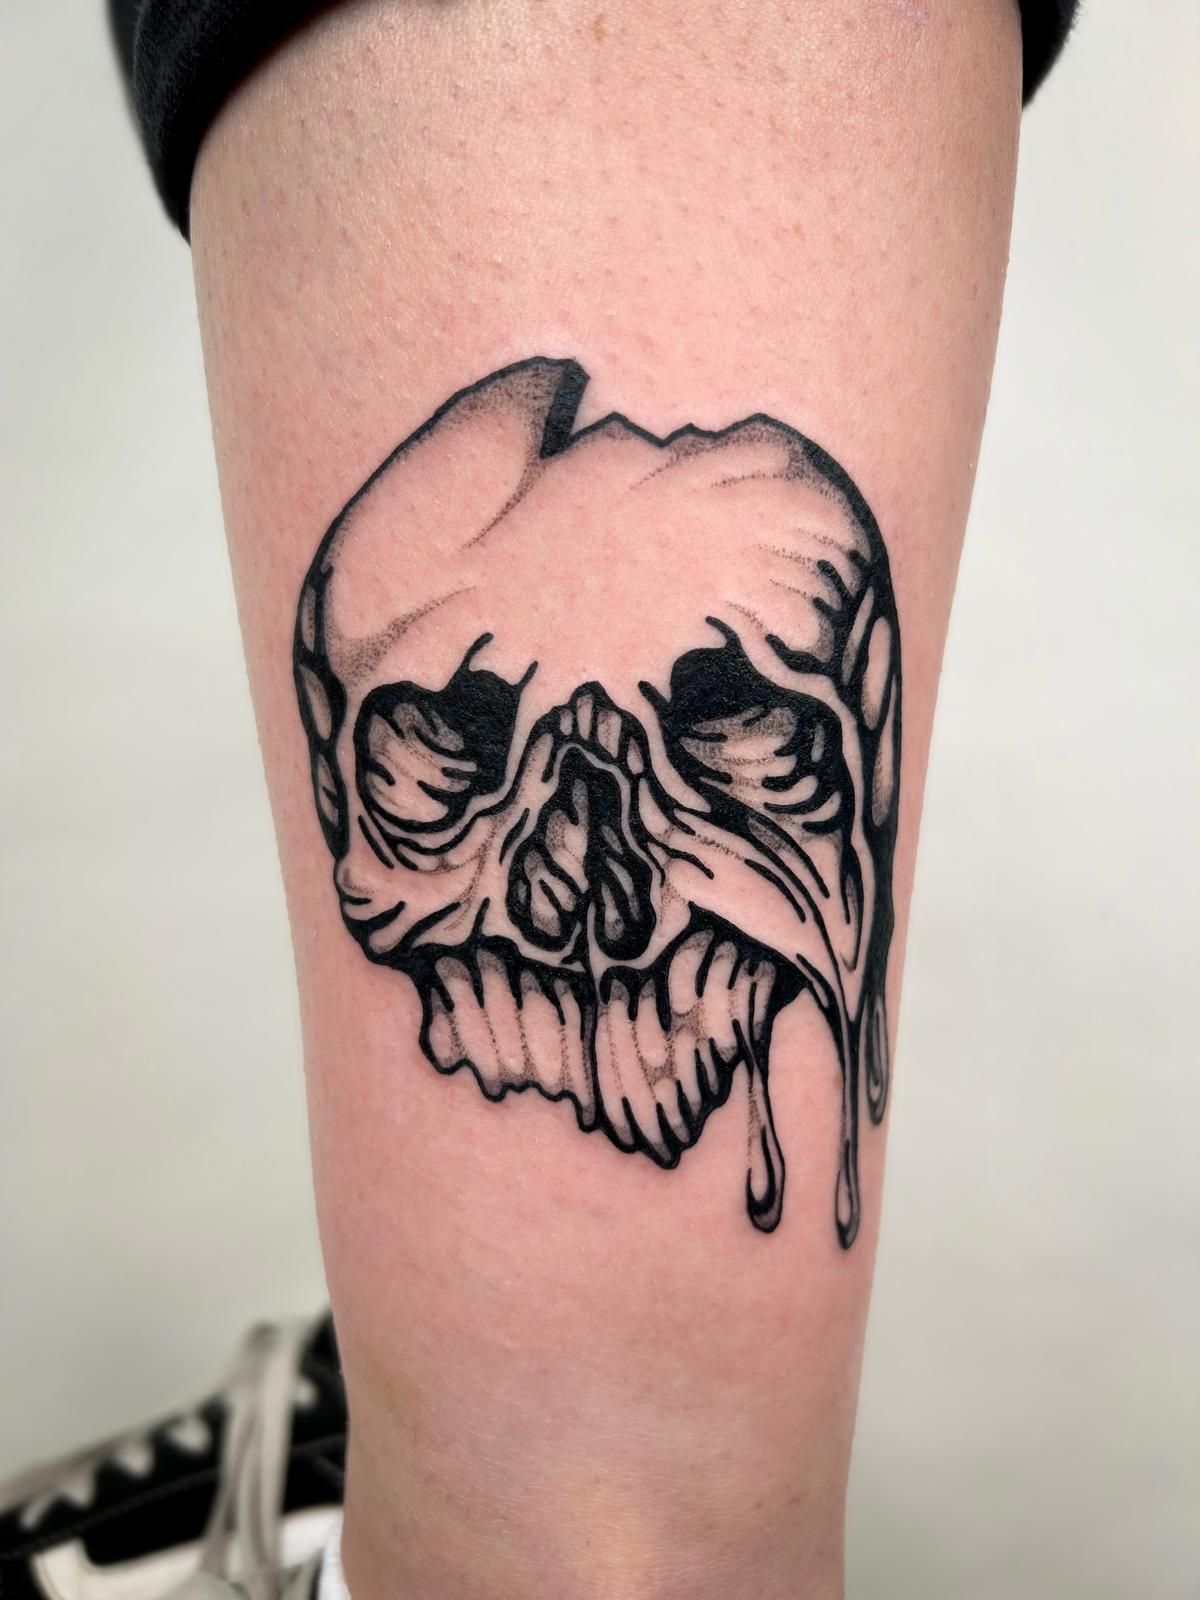 Skull tattoo png images | PNGWing